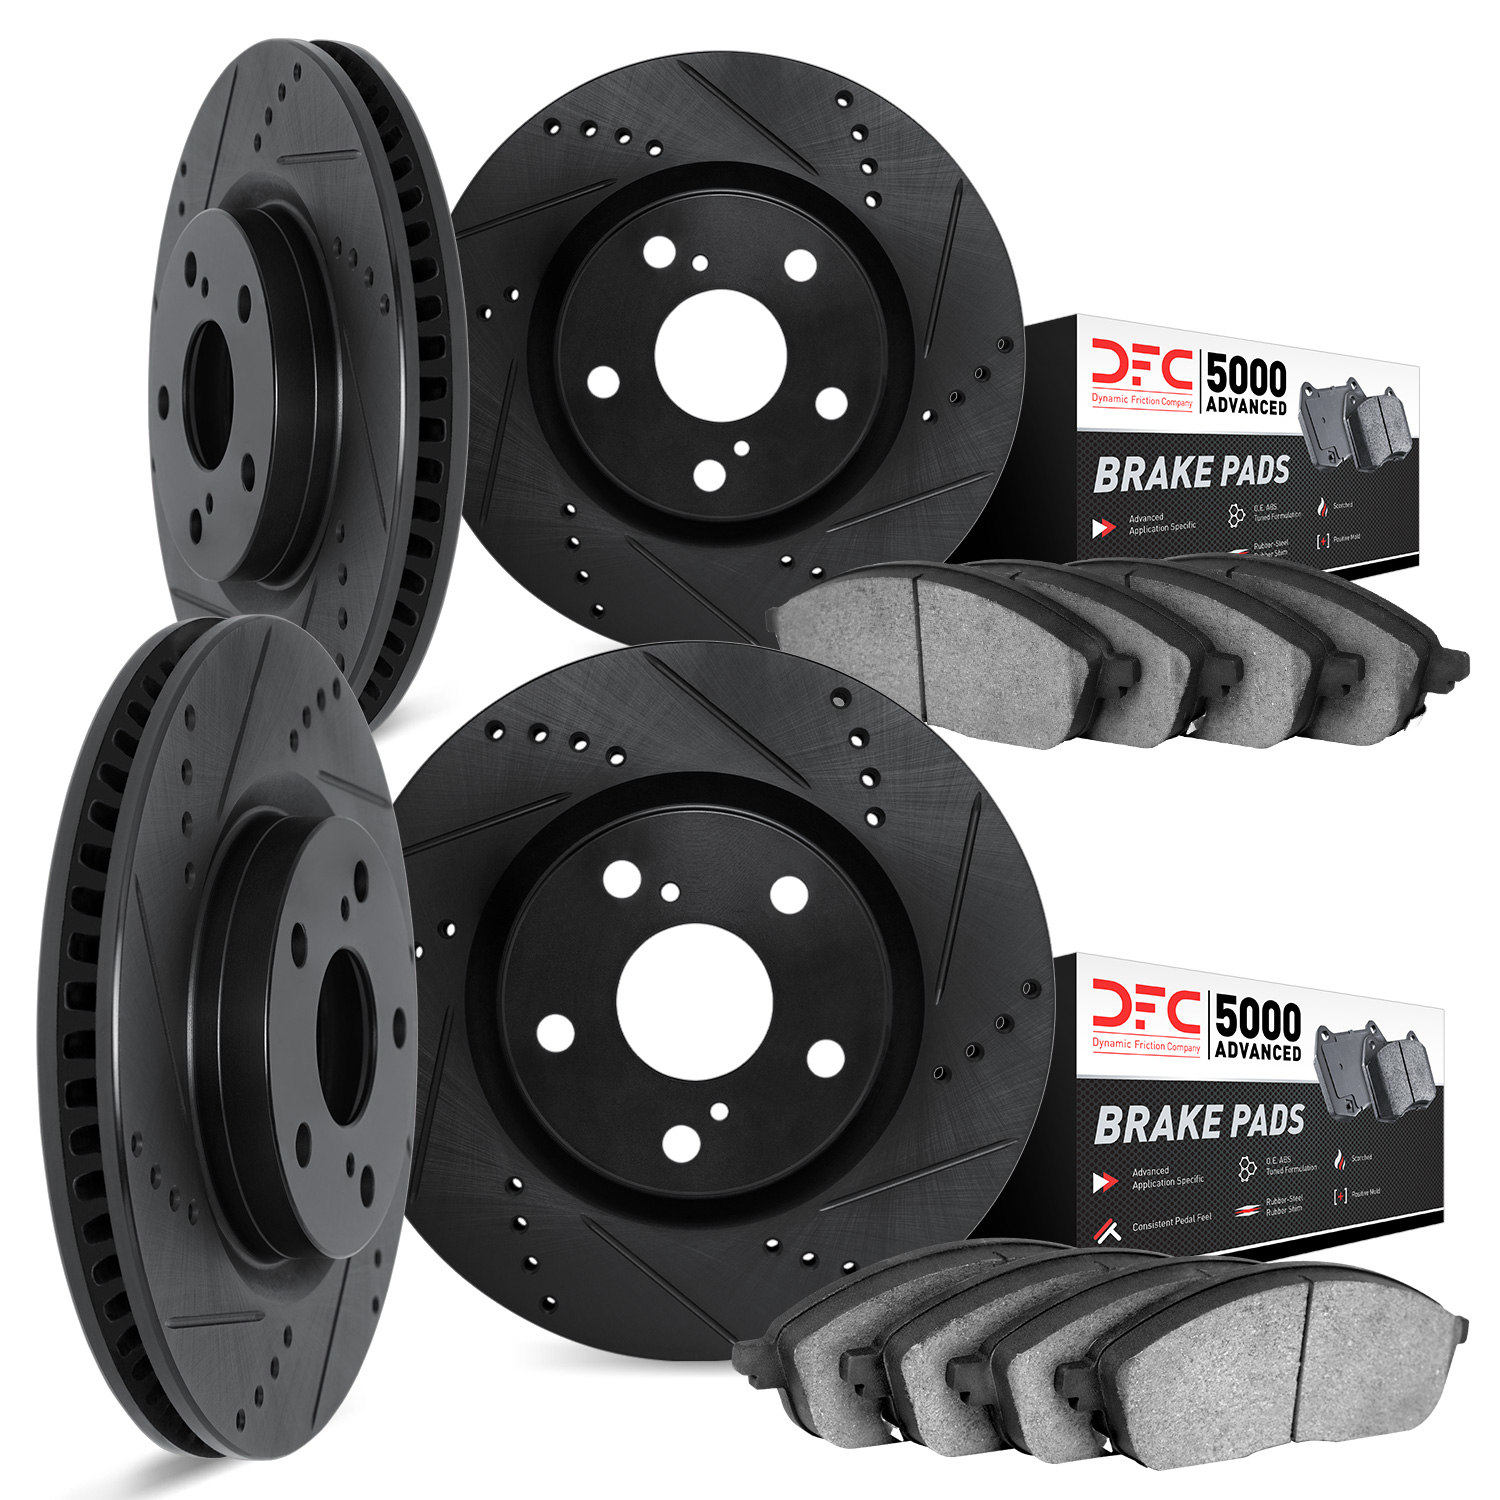 8504-68007 Drilled/Slotted Brake Rotors w/5000 Advanced Brake Pads Kit [Black], 2008-2020 Infiniti/Nissan, Position: Front and R